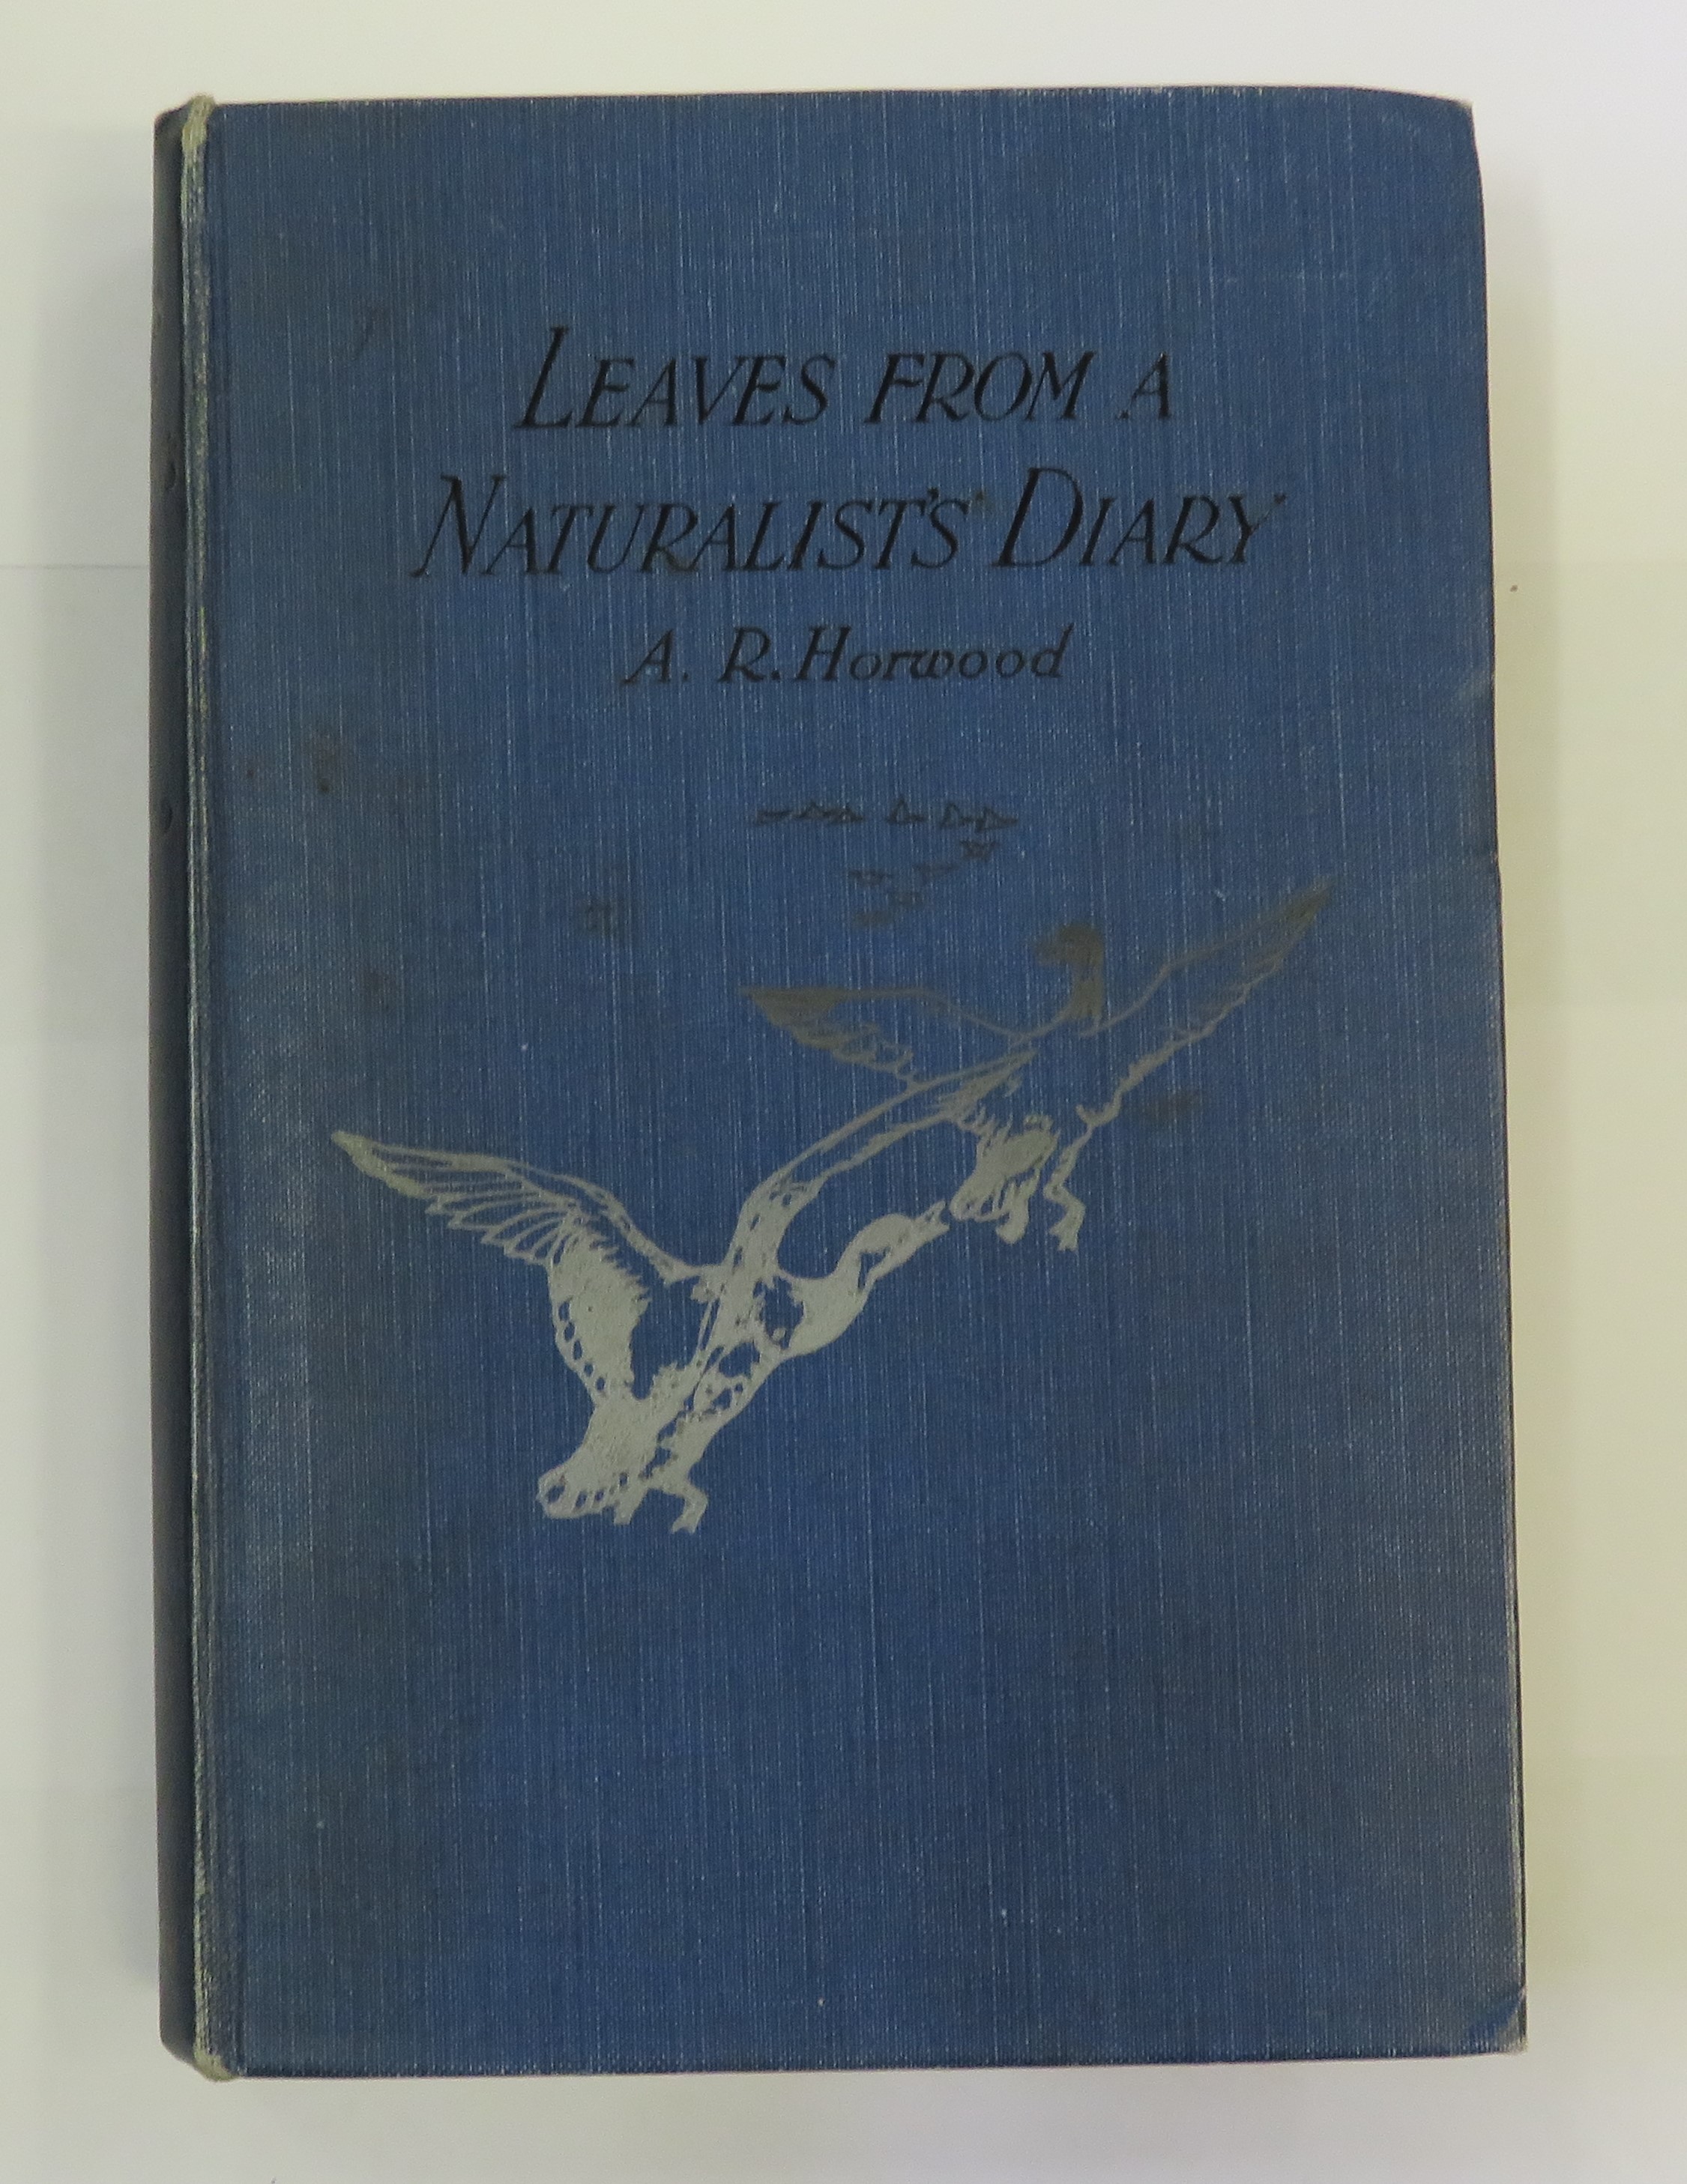 Leaves from a Naturalist's Diary